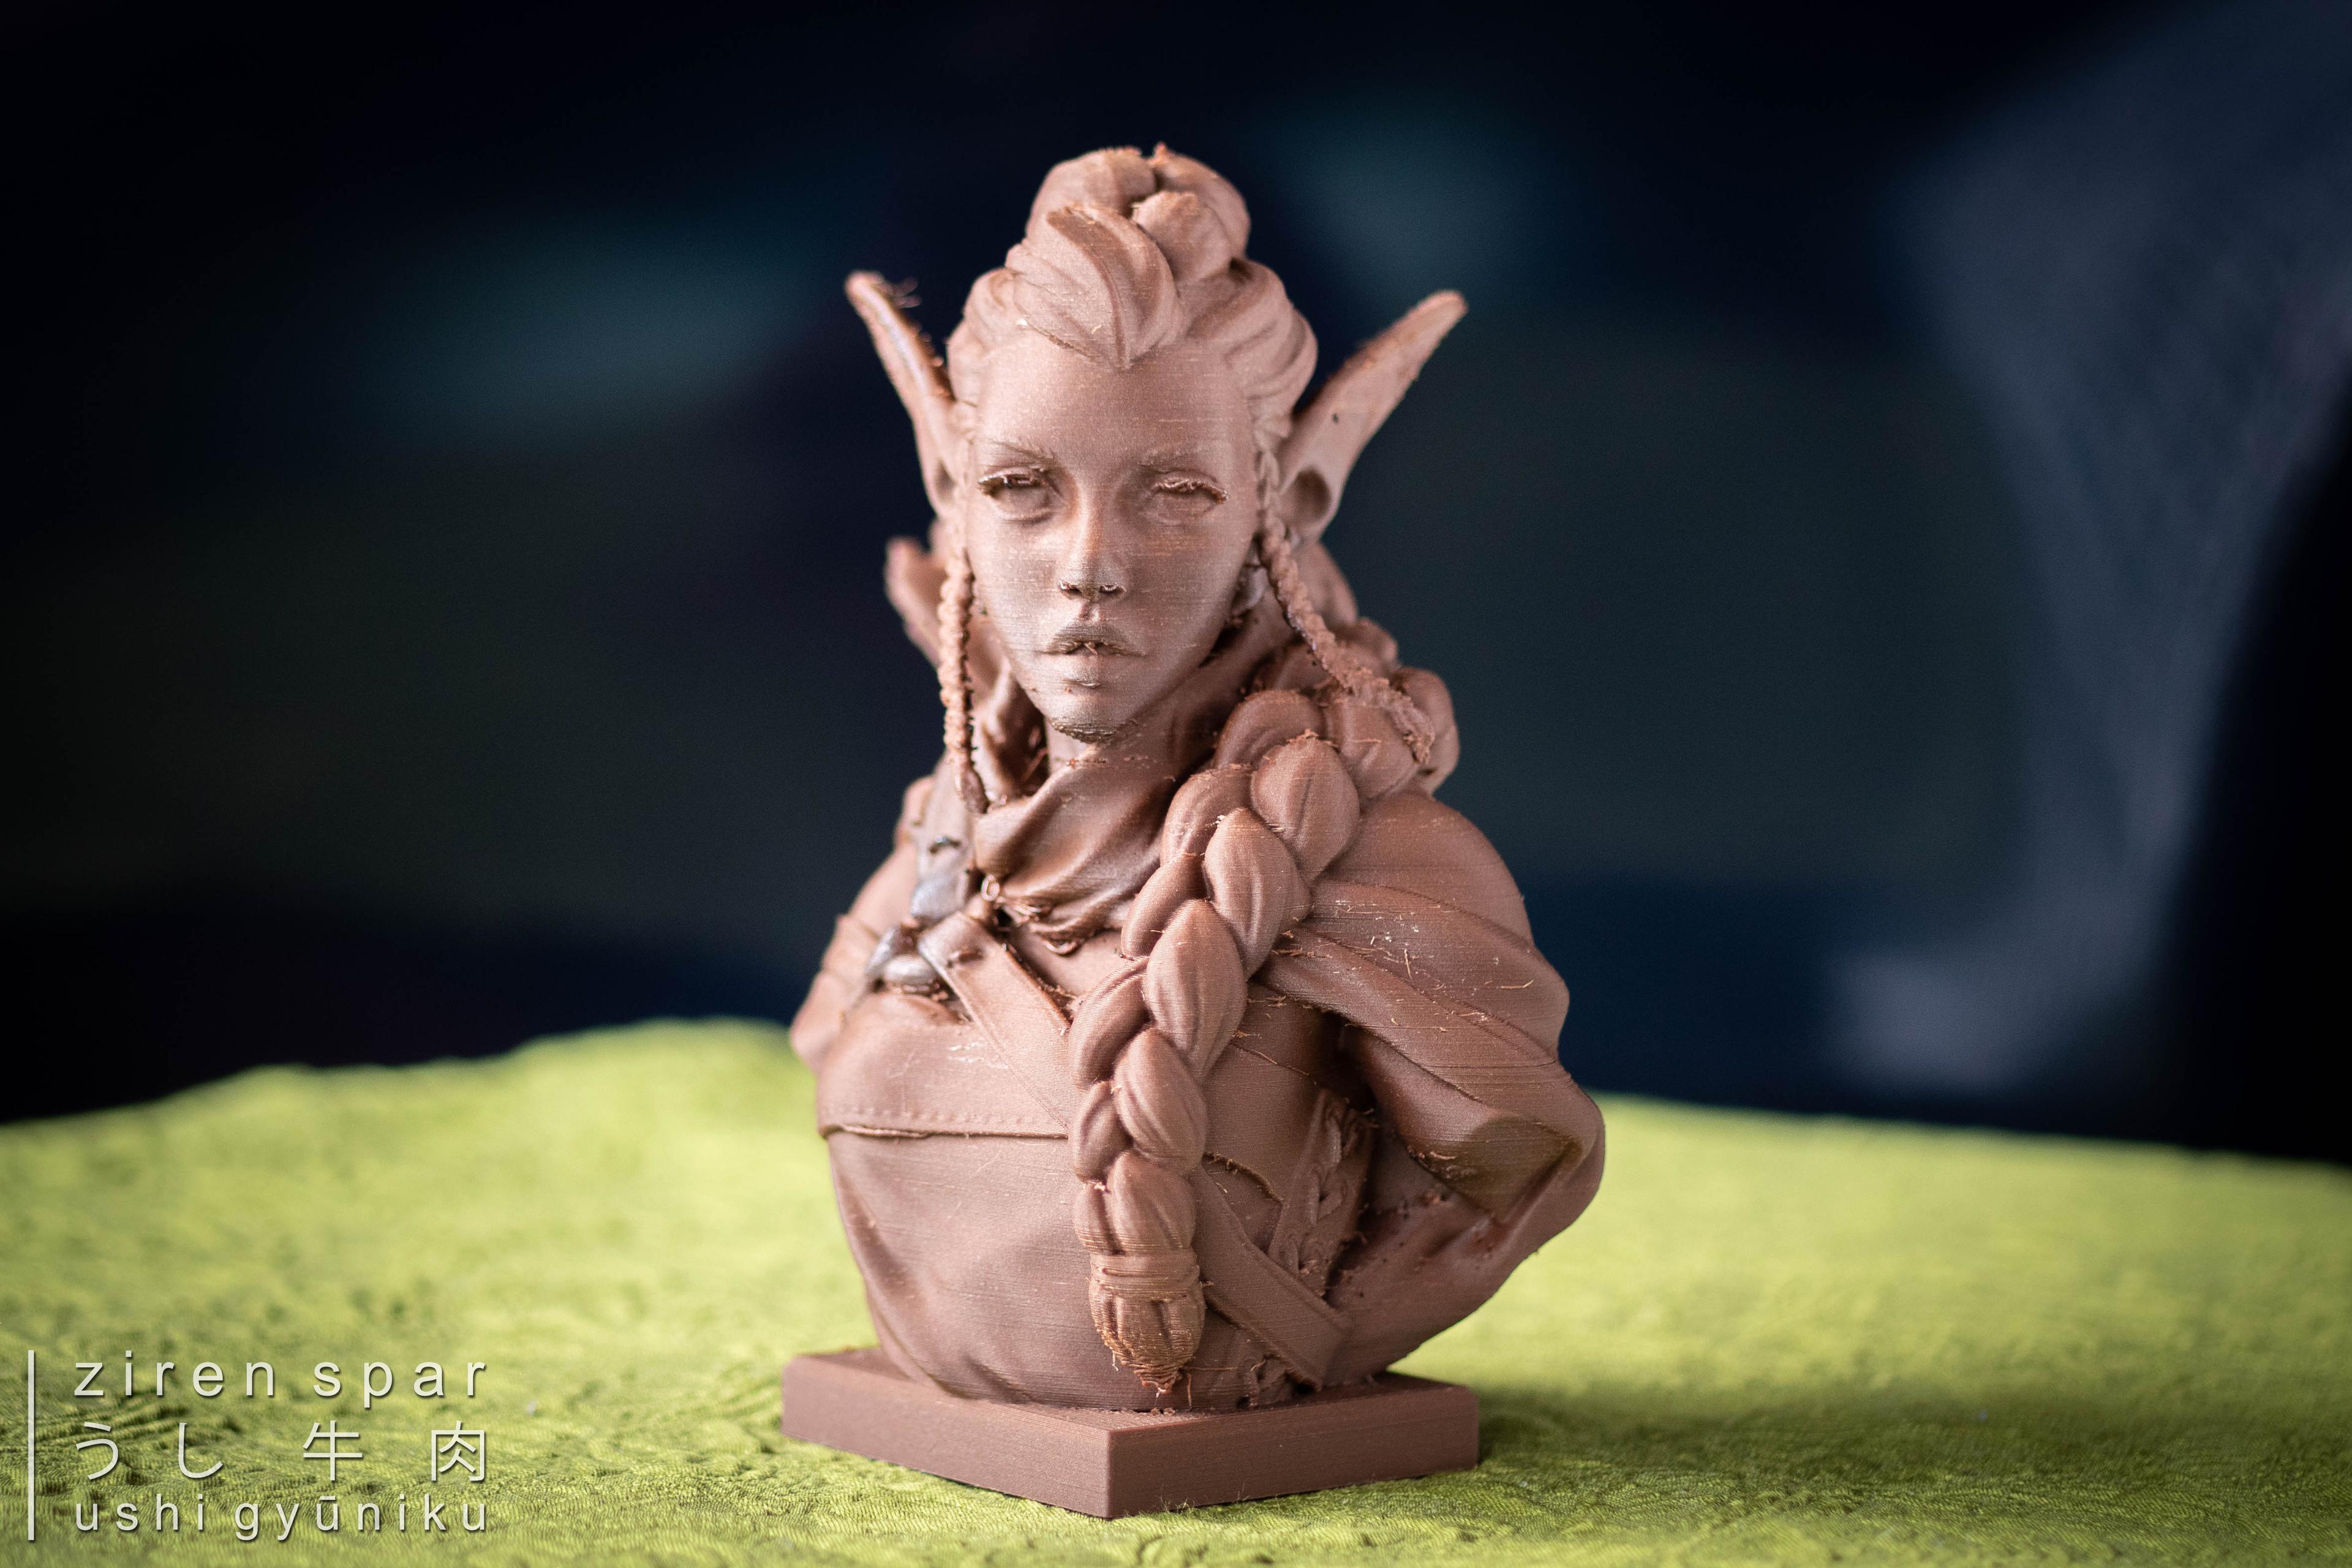 Elf Archer Bust Support Free - elf archer bust. the filament I used is two years since I opened which I simply dried and works fantastic except for the stringing as I didn't really try to find its sweet spot 😅
🧵 colorfabb corkfill
💾 iczfirz or kk11243234567891
🖨️ cetus3d w/ capricorn tube & diamondback nozzle
📐 ~295% scale, 180mm tall
📸 gears: niichan
🧩 assist: touchan & kāchan
#filamentfebruary - 3d model